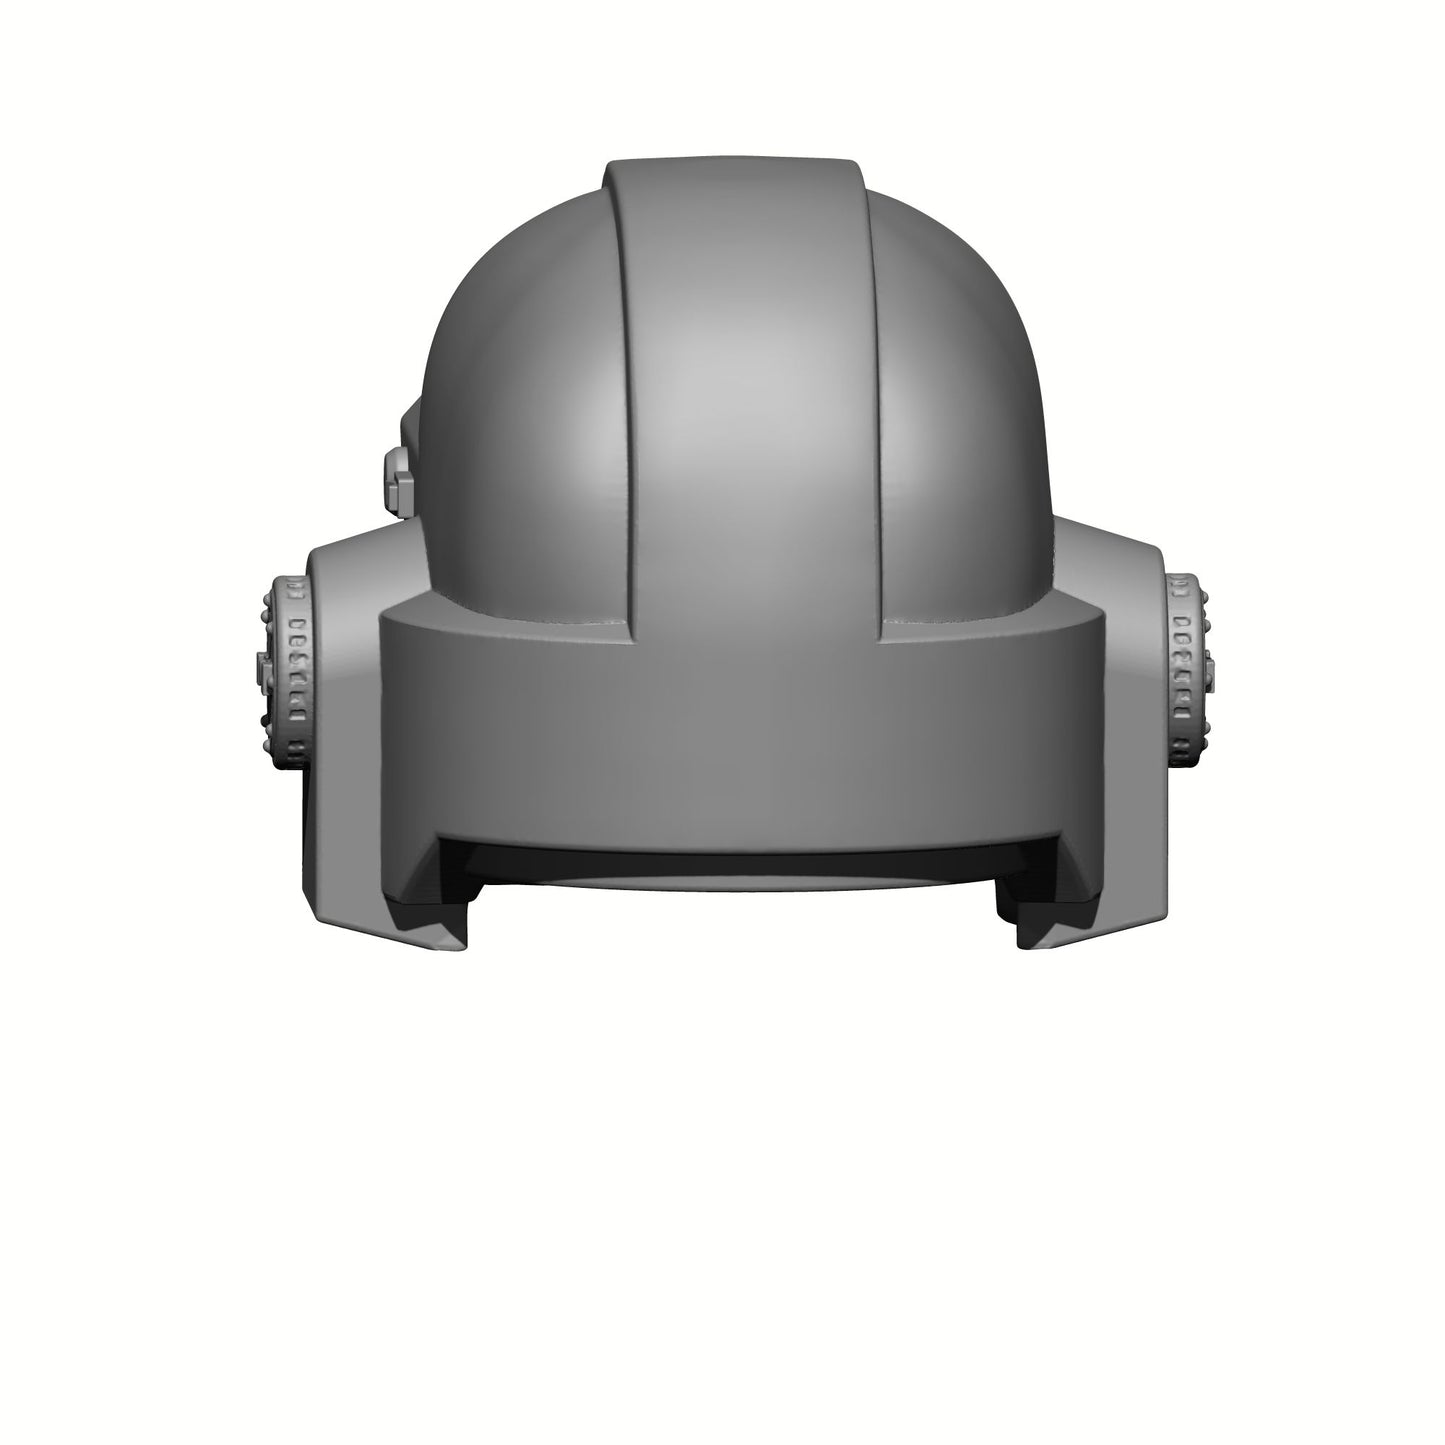 Back of the Techmarine Mark VI Helmet with Optics Compatible with McFarlane Toys Space Marine Action Figures